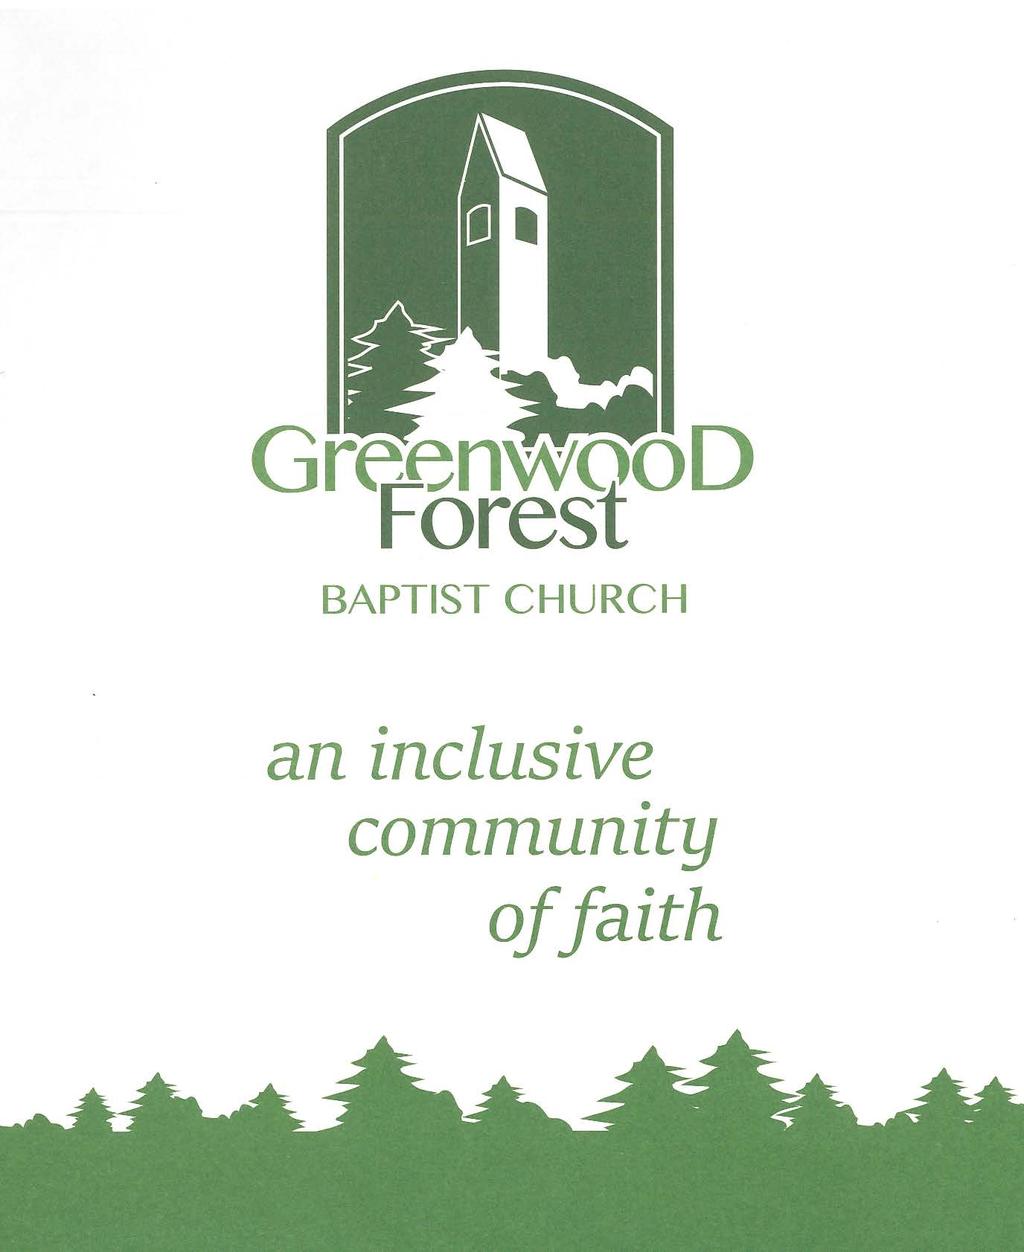 GREENWOOD FOREST BAPTIST CHURCH The Worship of God The Fourteenth Sunday After Pentecost August 26, 2018 There will be no Children s Time programming this Sunday.